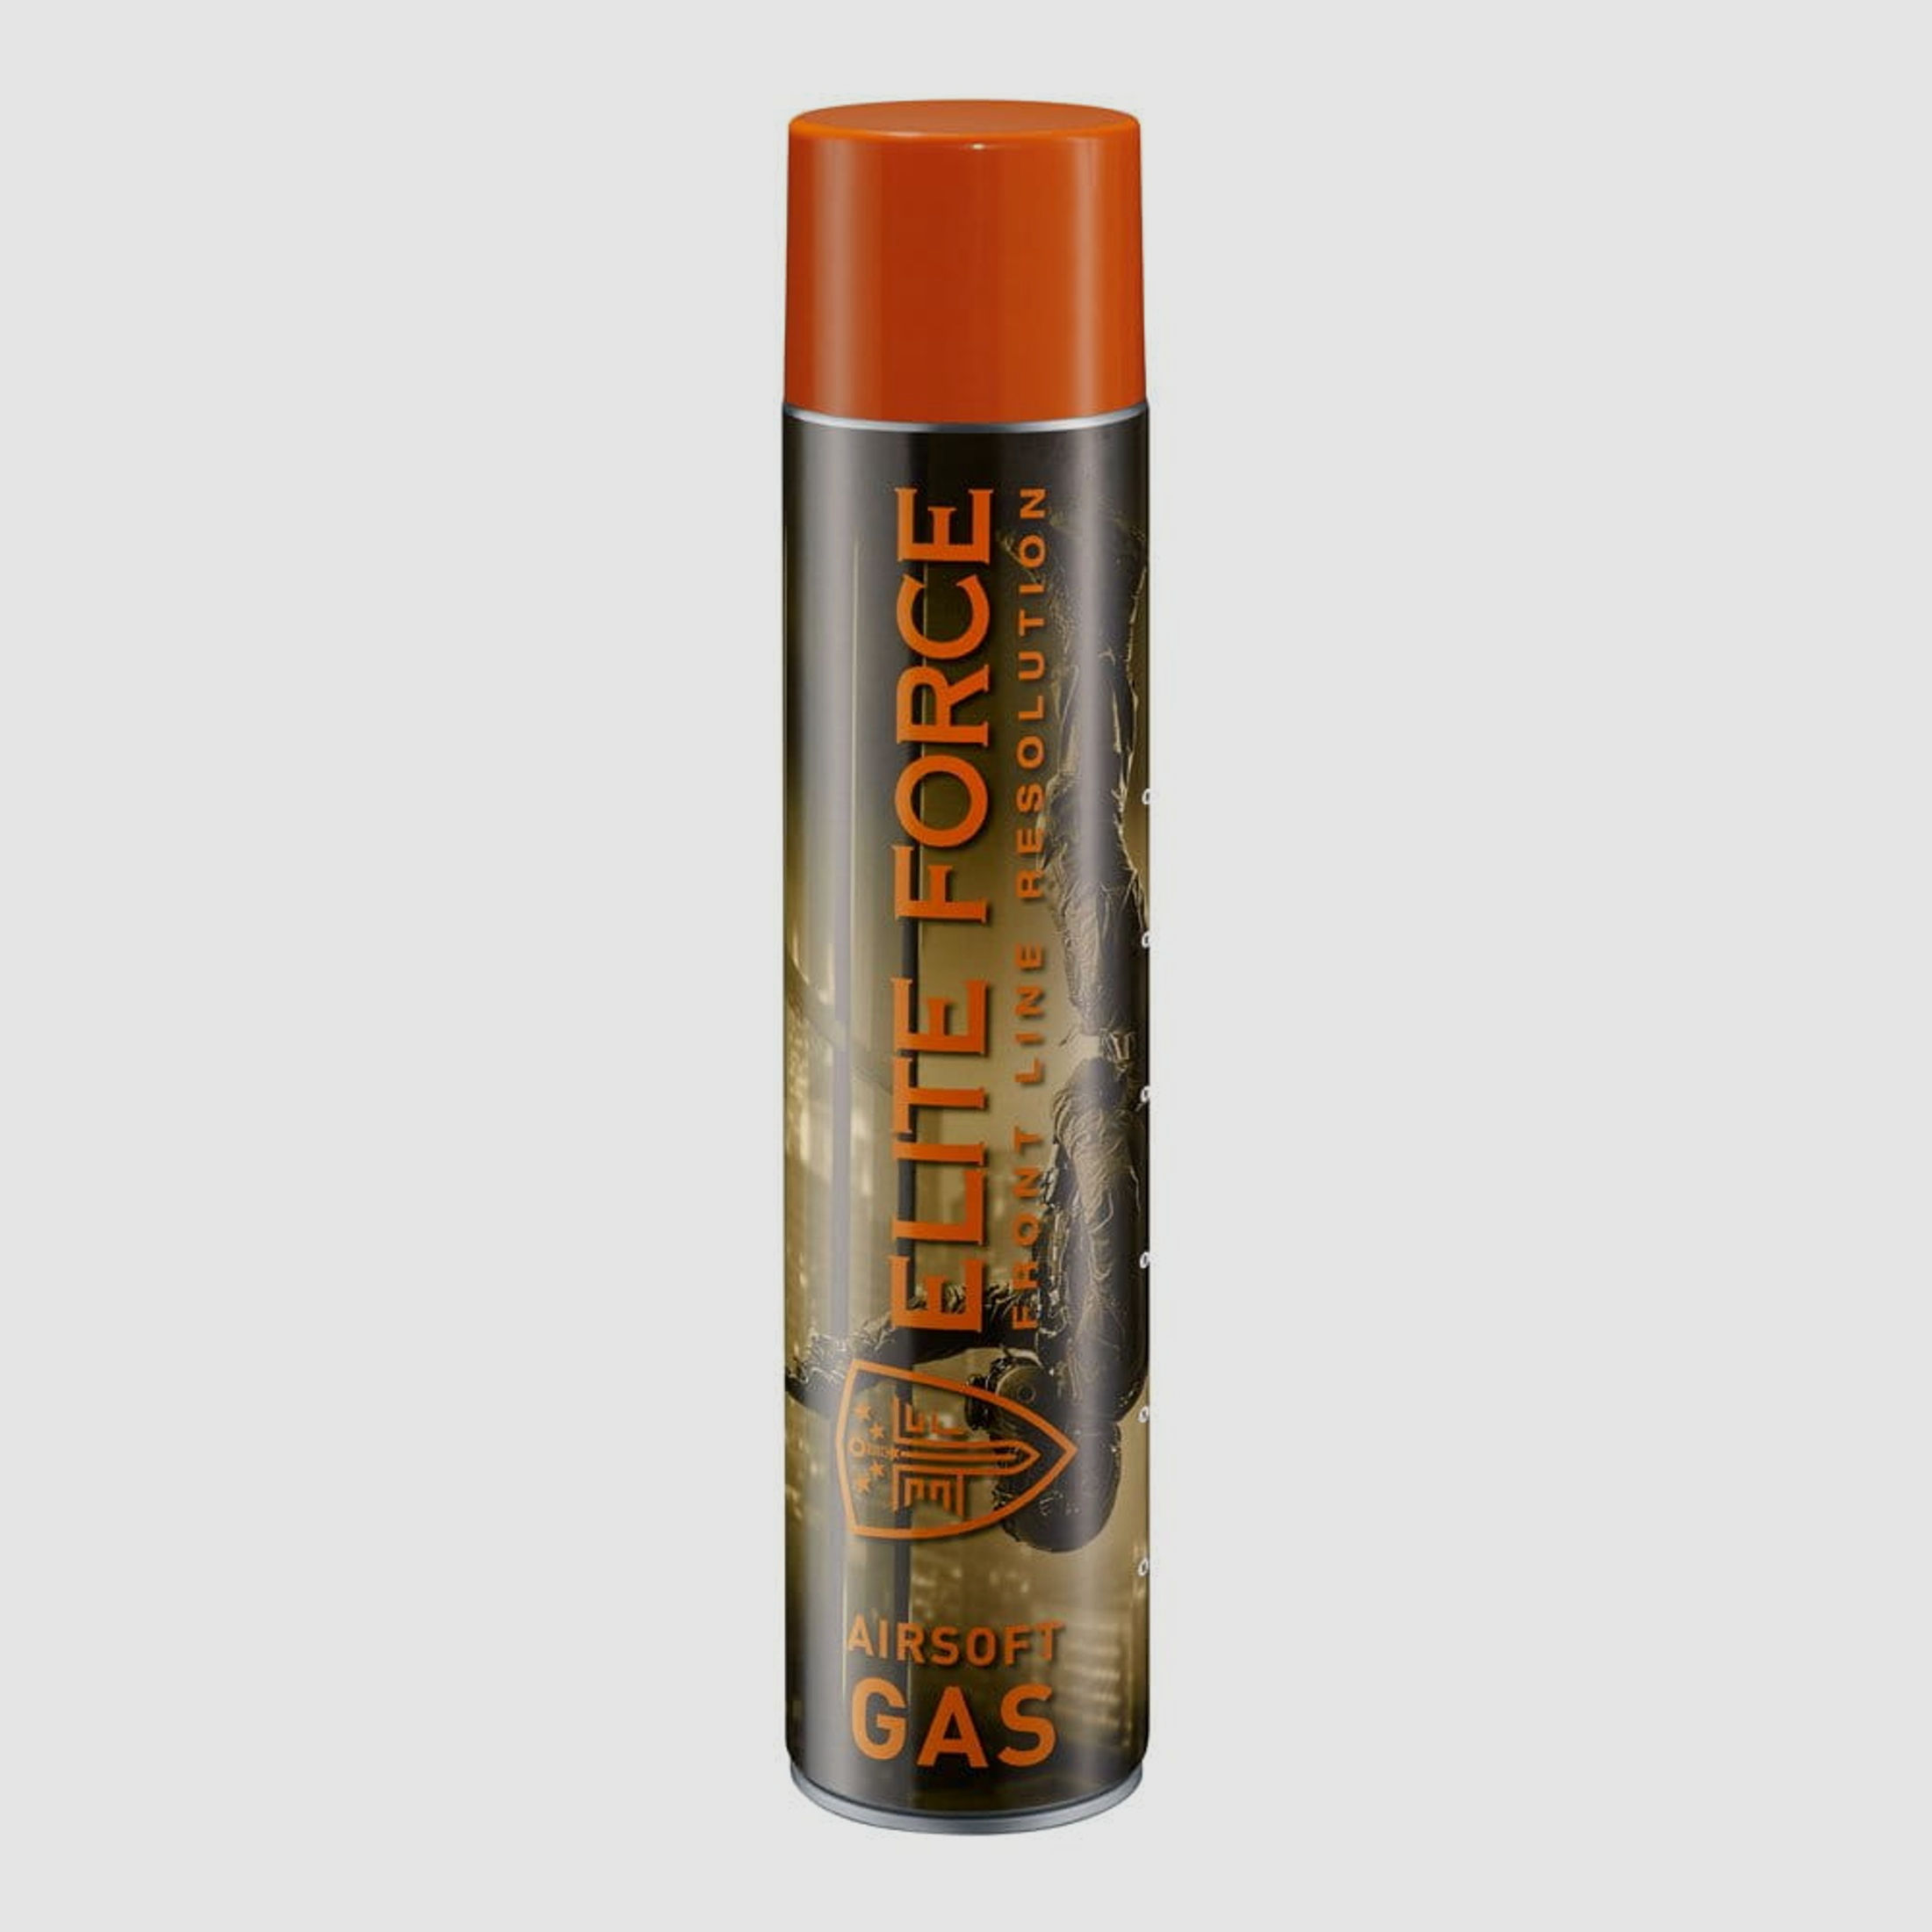 Elite Force Airsoft Gas